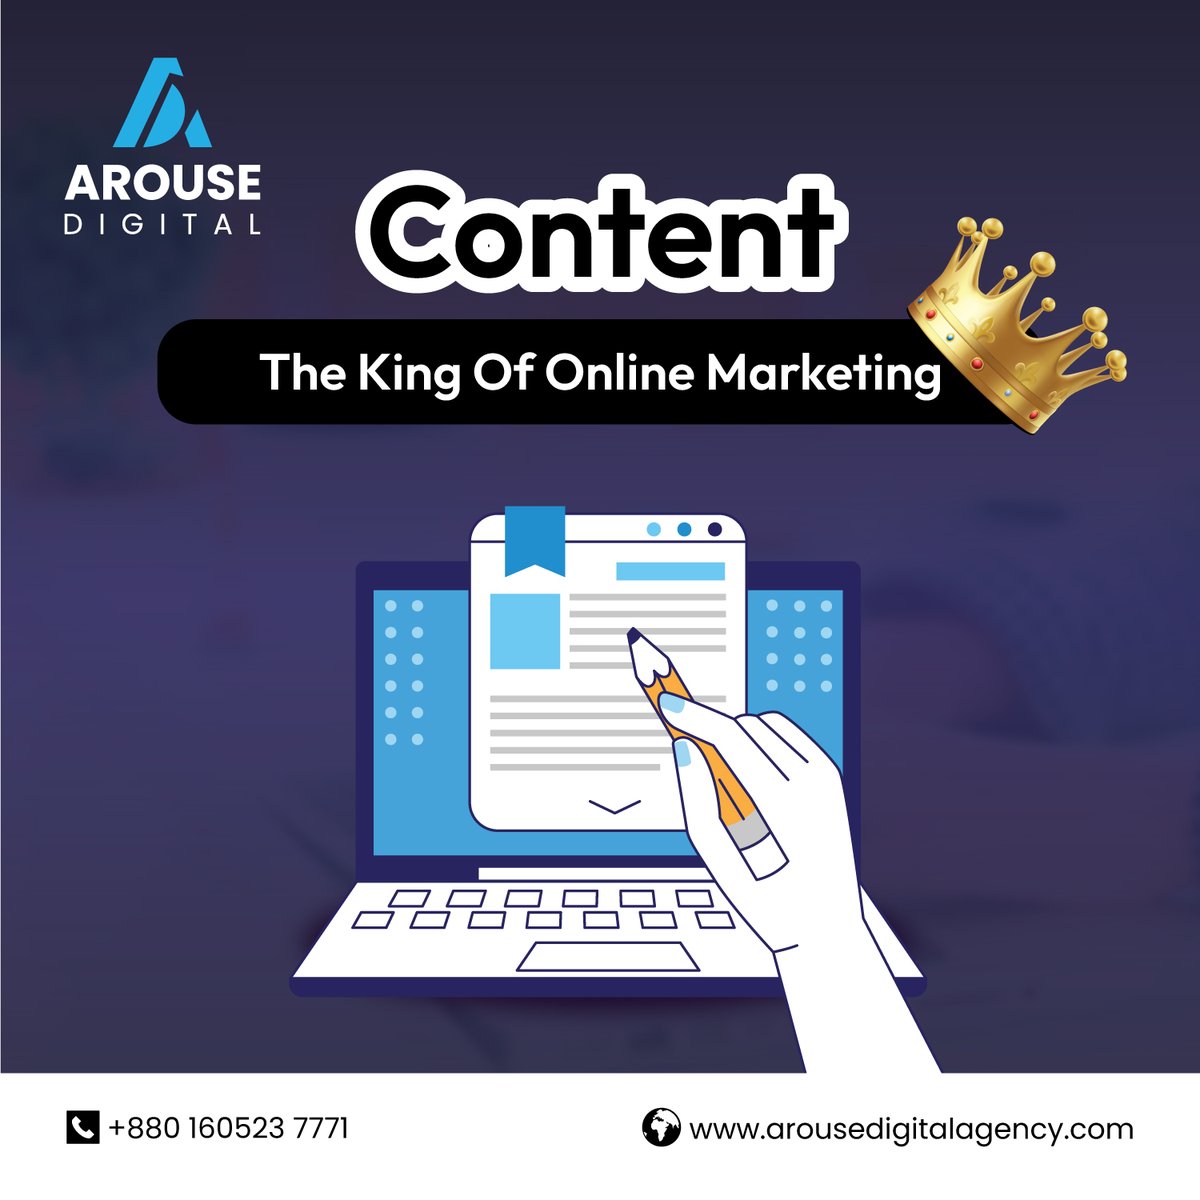 Great content can boost brand promotion. Captivating blog articles or engaging social media posts can work wonders. Beautifully presenting your brand content is crucial. Content is often the king of online marketing. 
#contentwriting #ContentCreator #seocontent